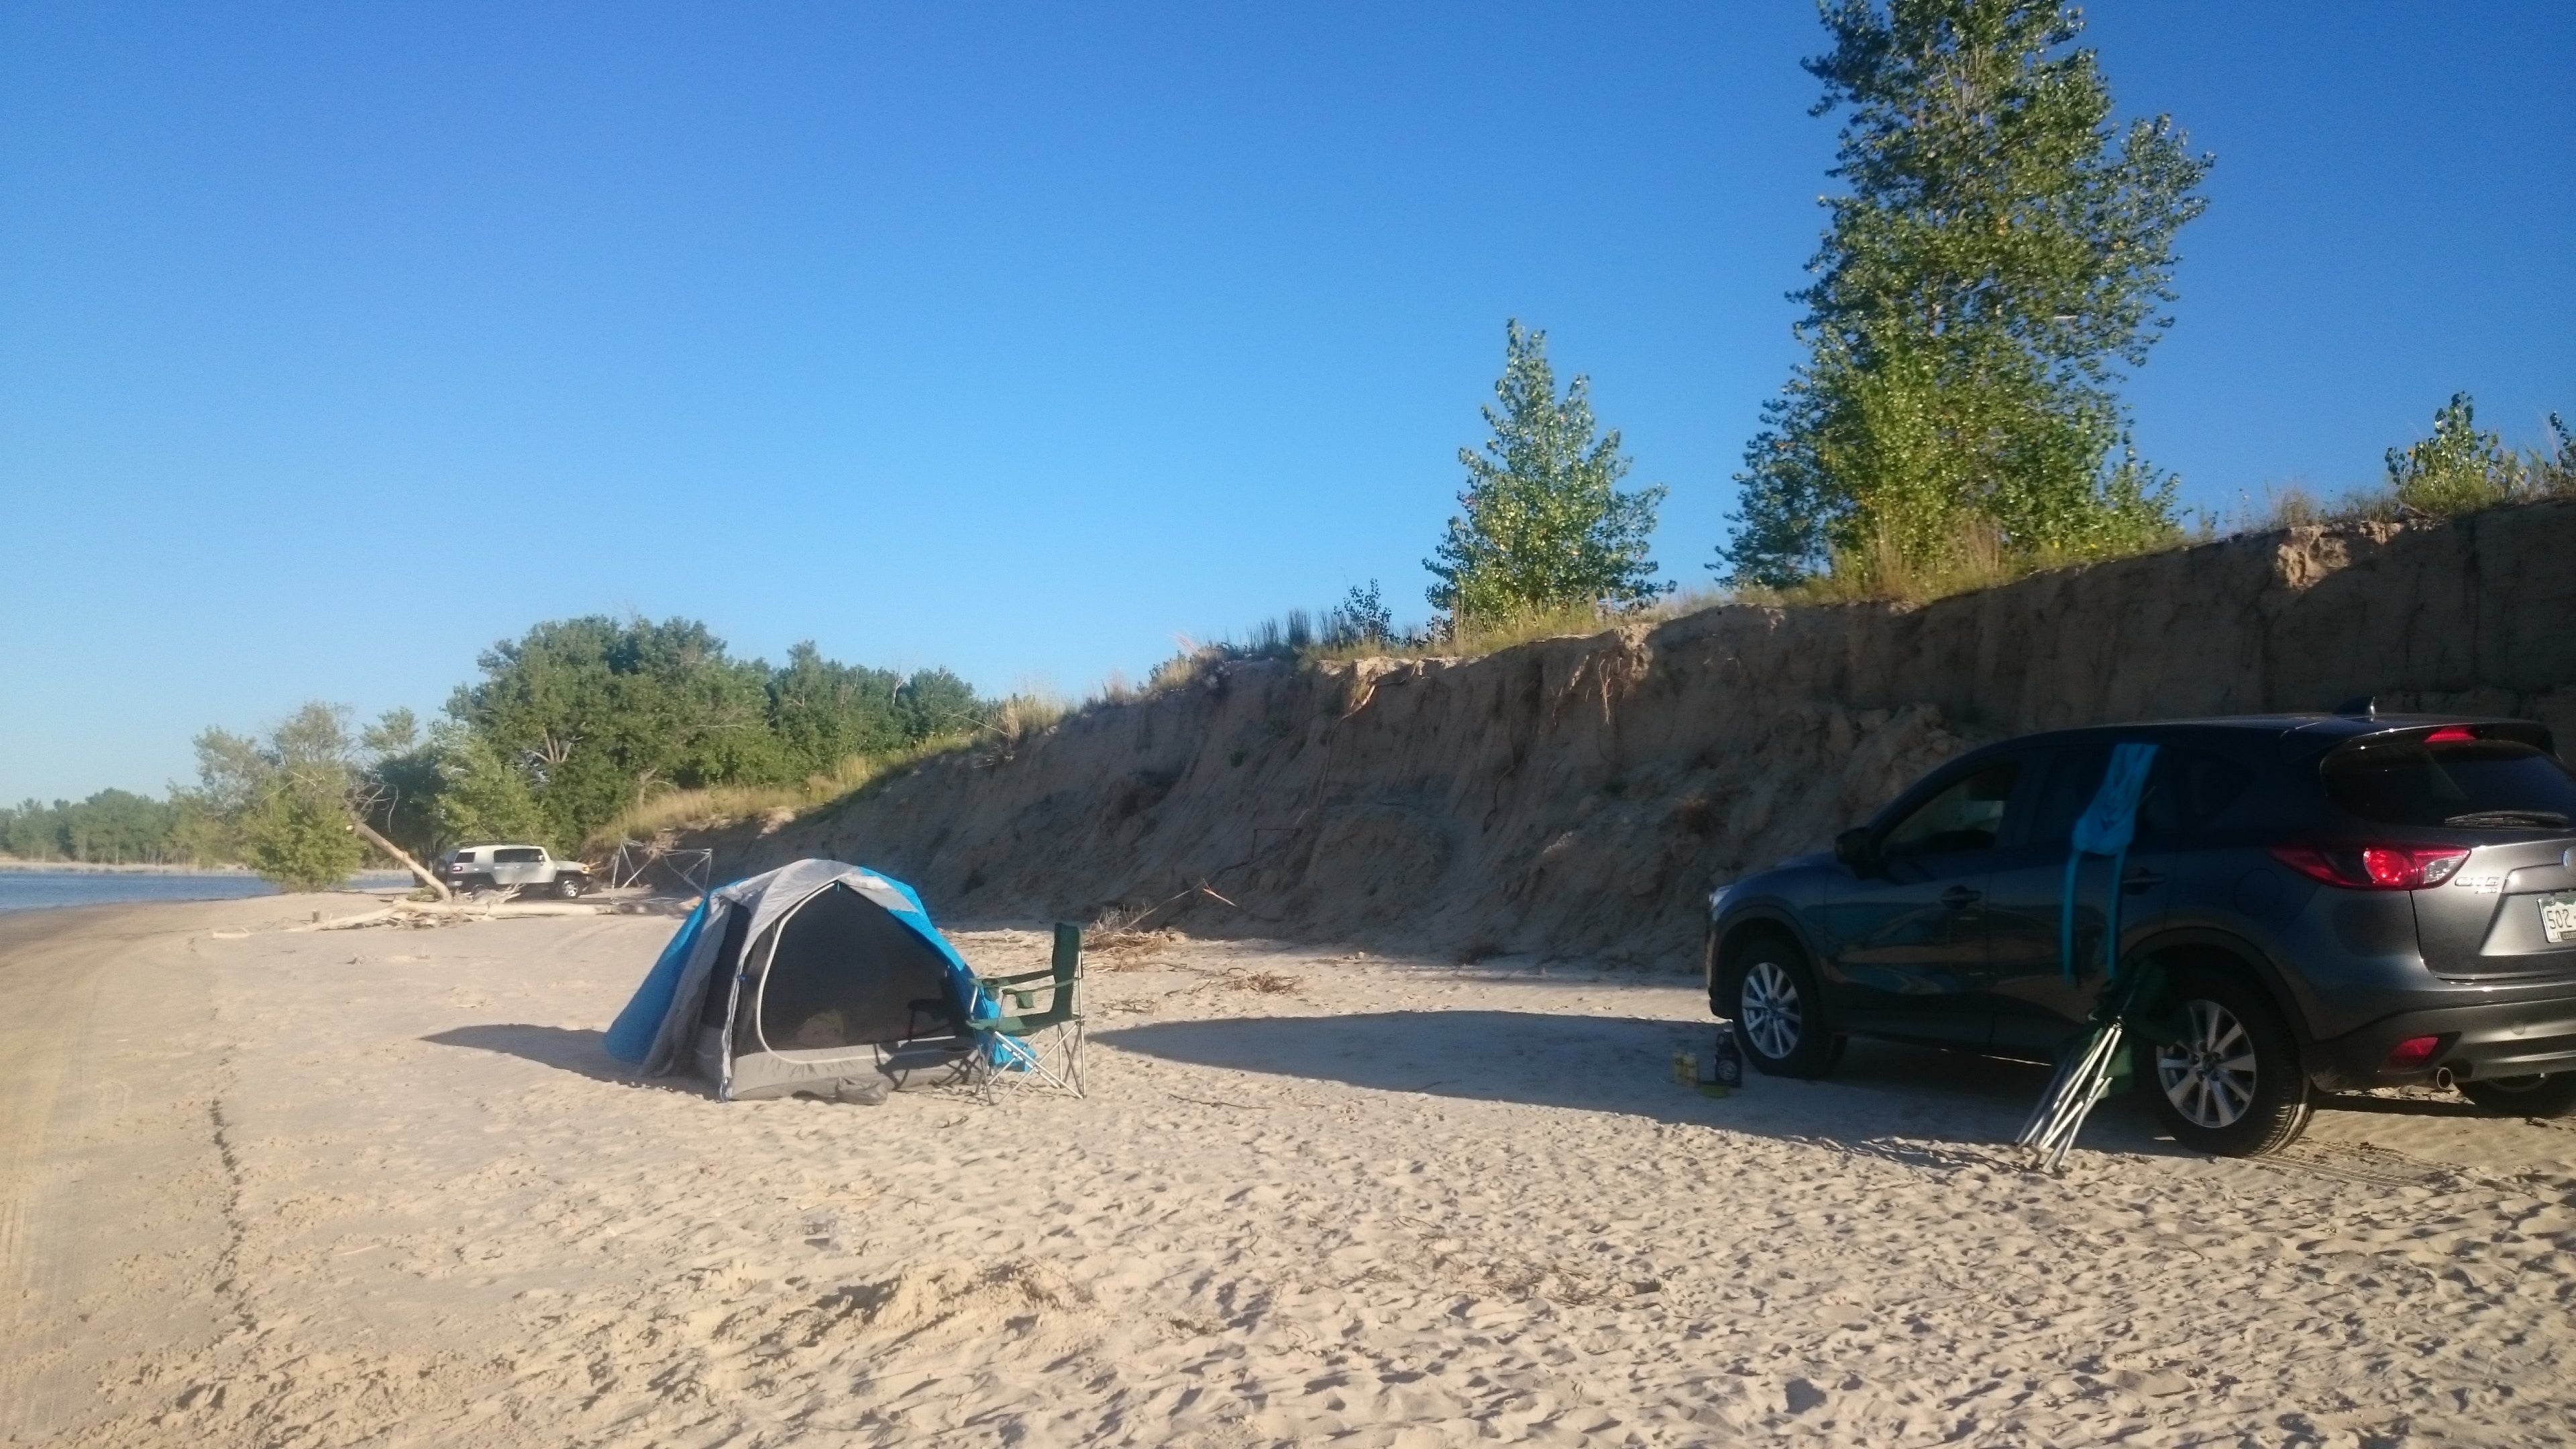 Others will camp along the beach as well so ensure you set up camp to allow other vehicles to pass safely. 